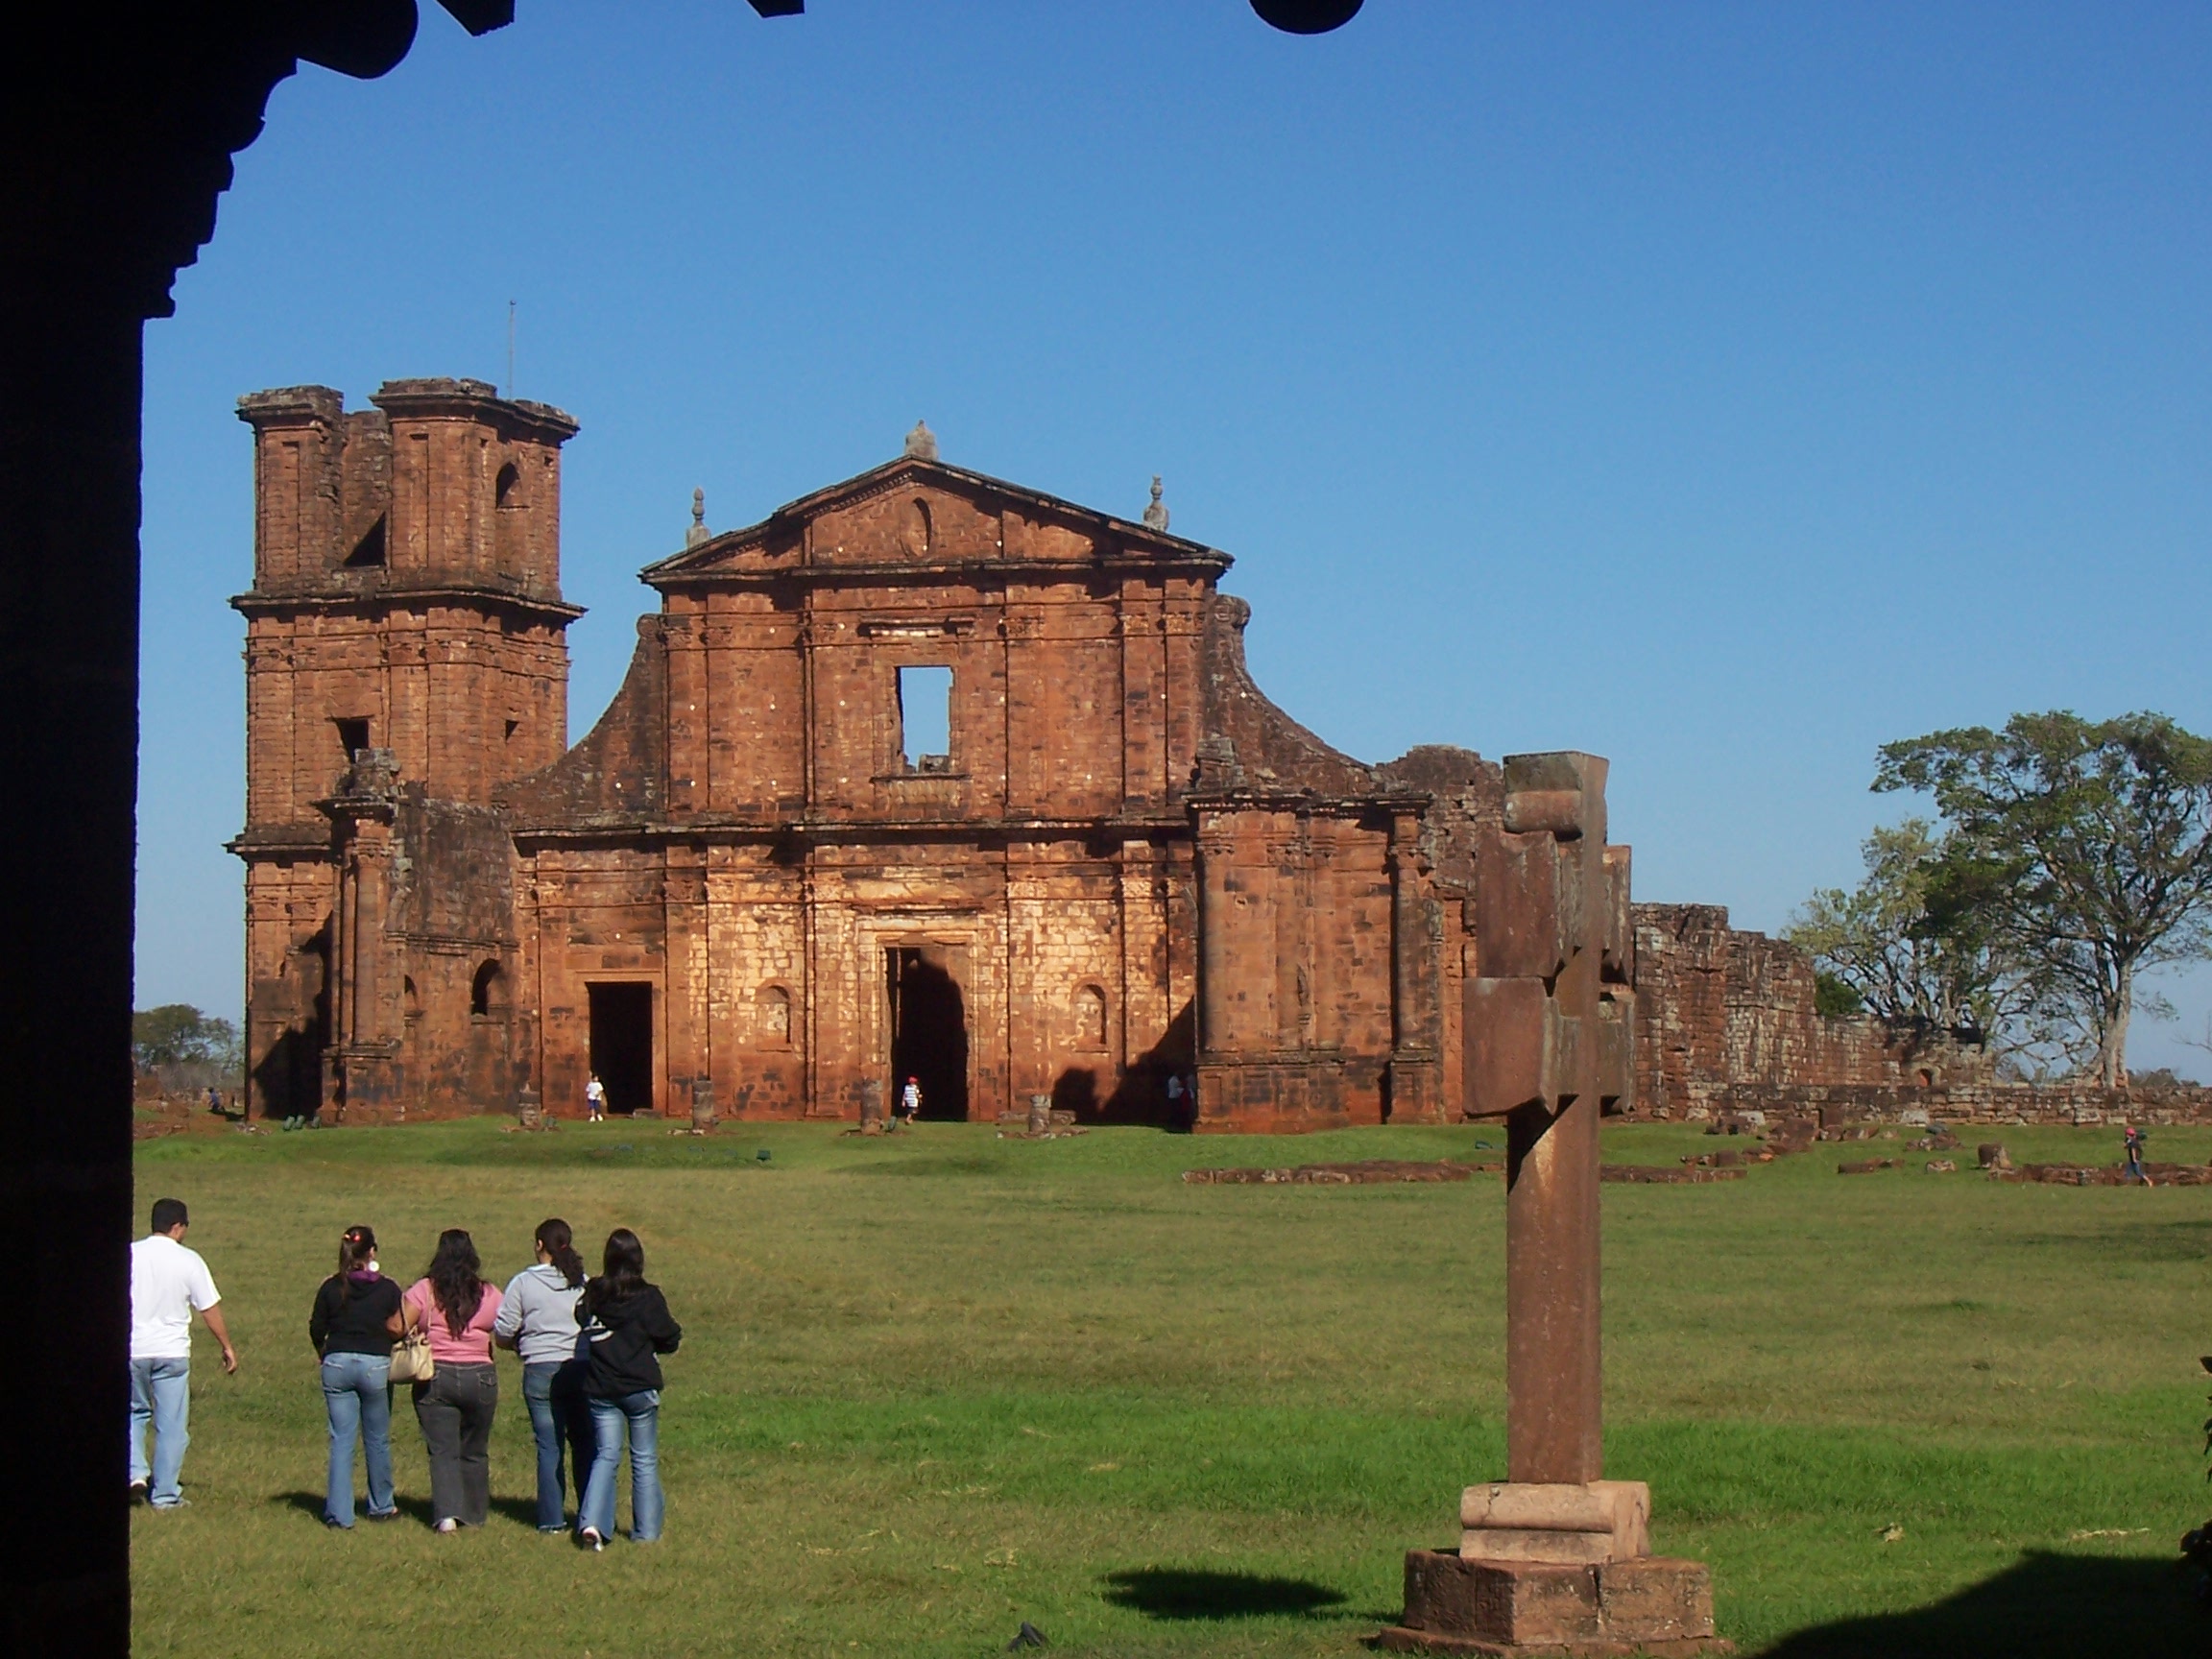 The Spanish Jesuit reduction of Sao Miguel das Missoes, Brazil.